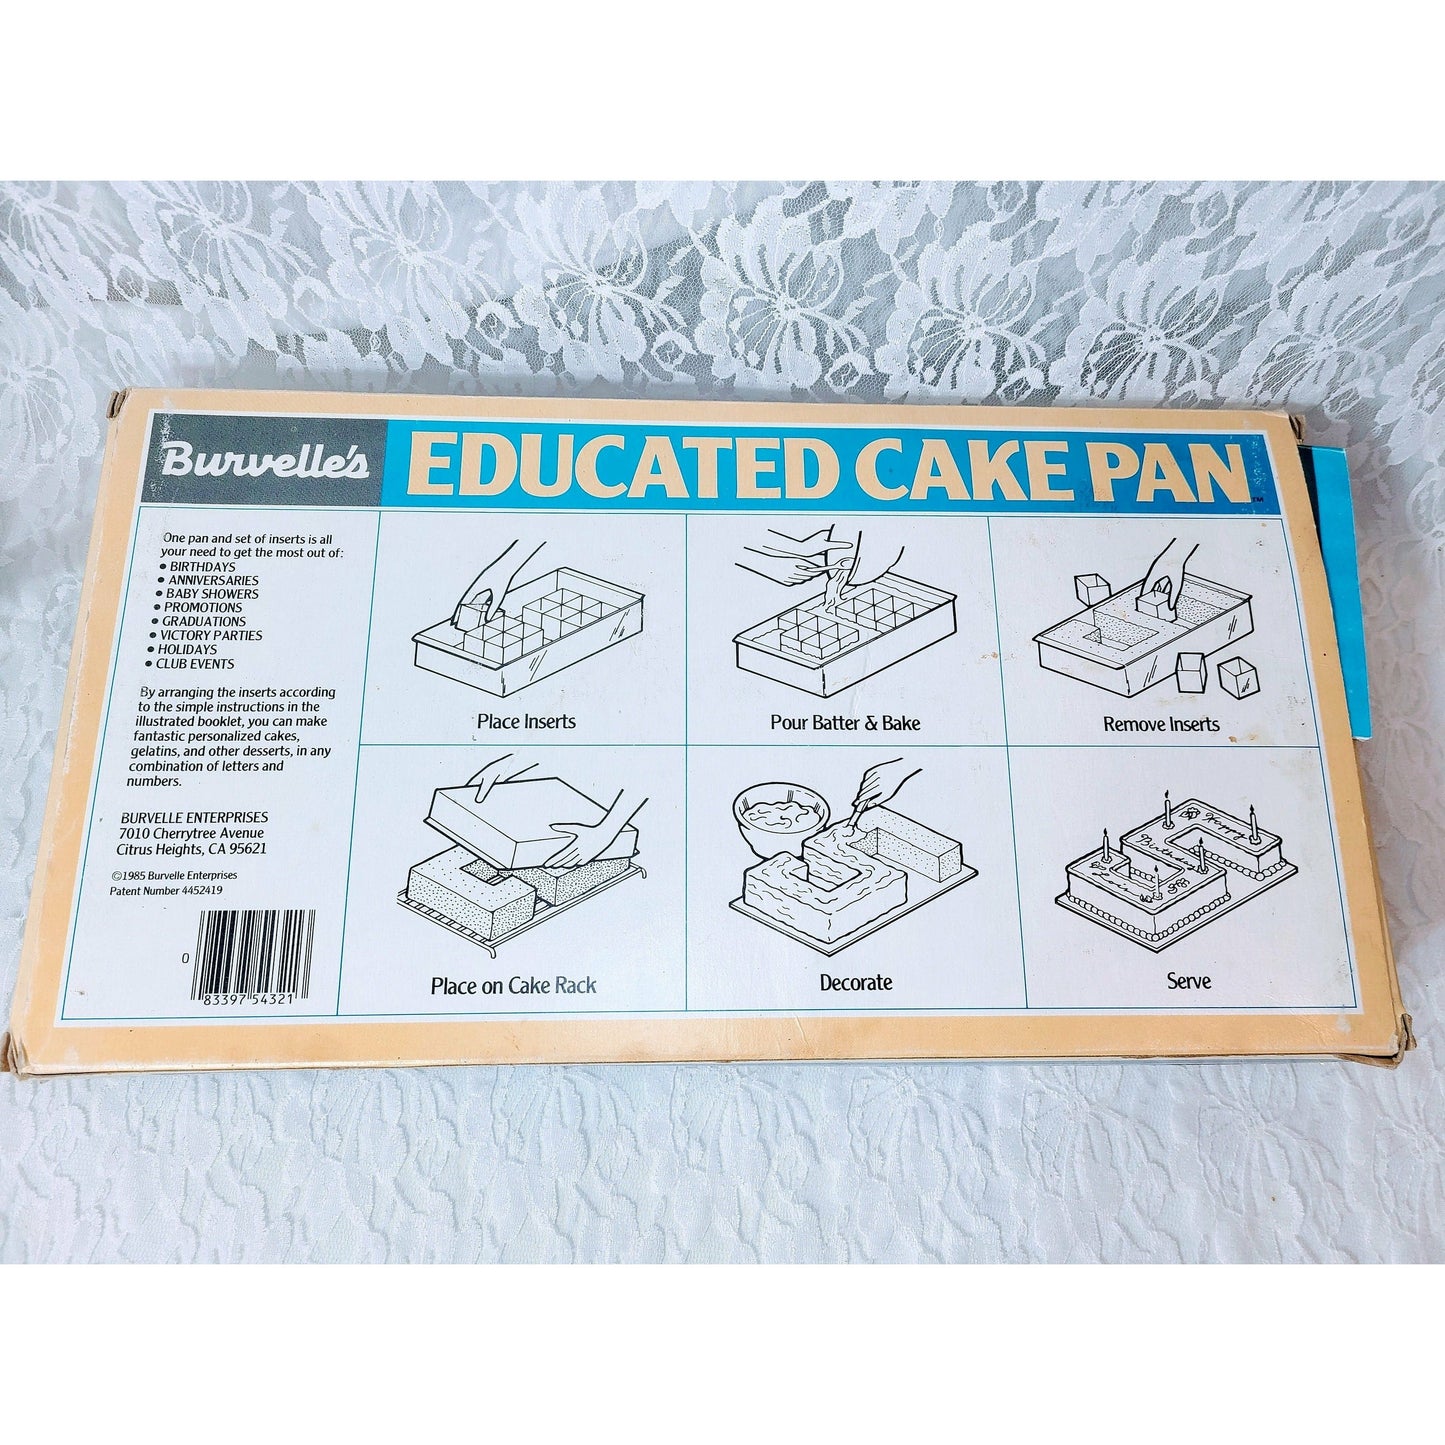 Burvelles Educated Cake Pan Metal Letters Numbers Custom Cakes ~ Vintage 1982 Cake Mold Pan Tin ~ Baking Supplies ~ Comes with Instructions!